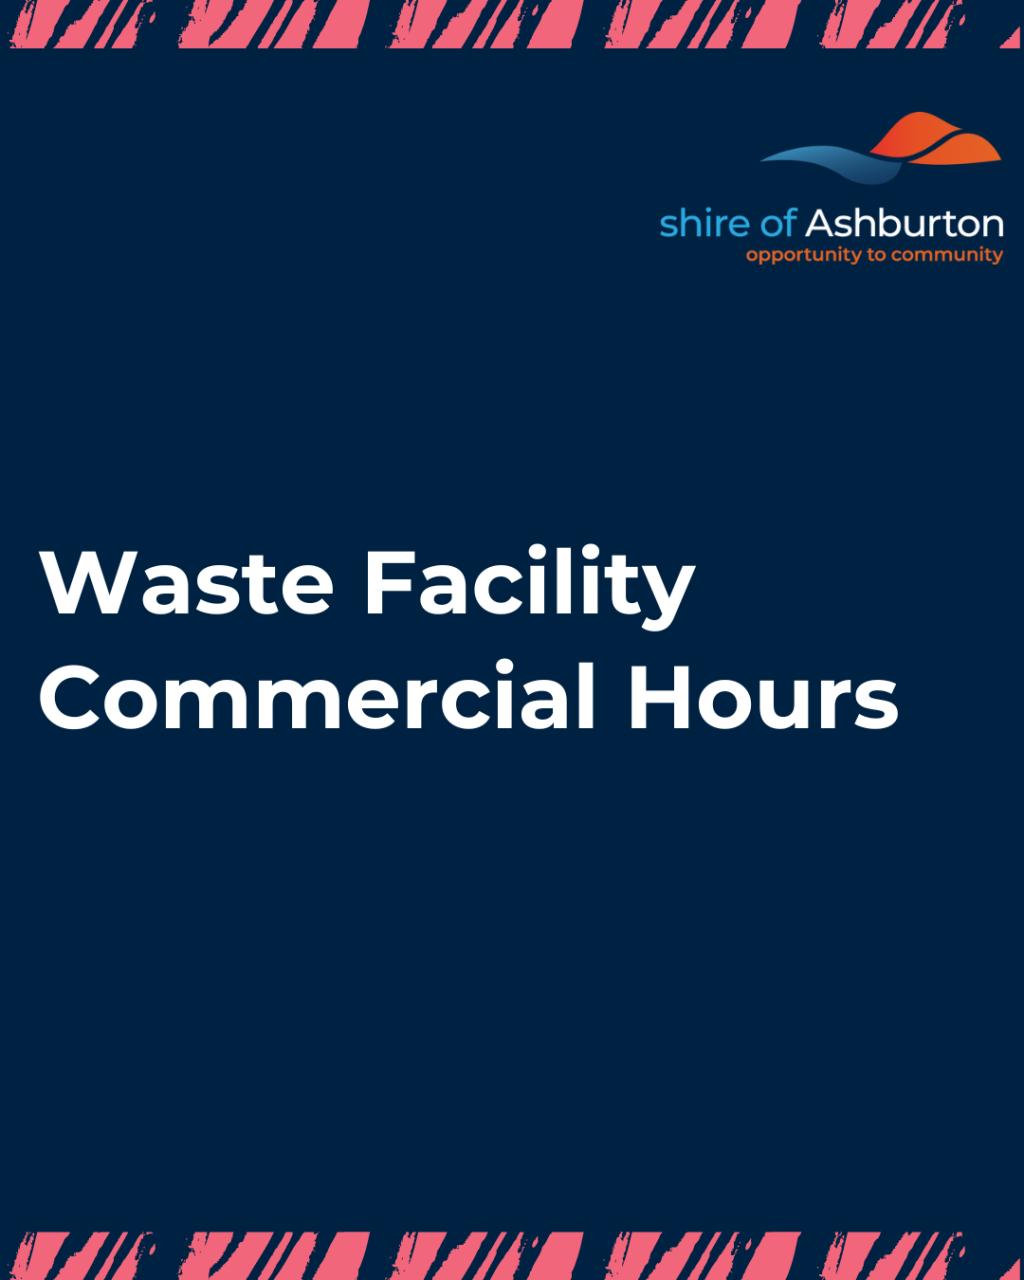 Tom Price Waste Facility Reduced Hours